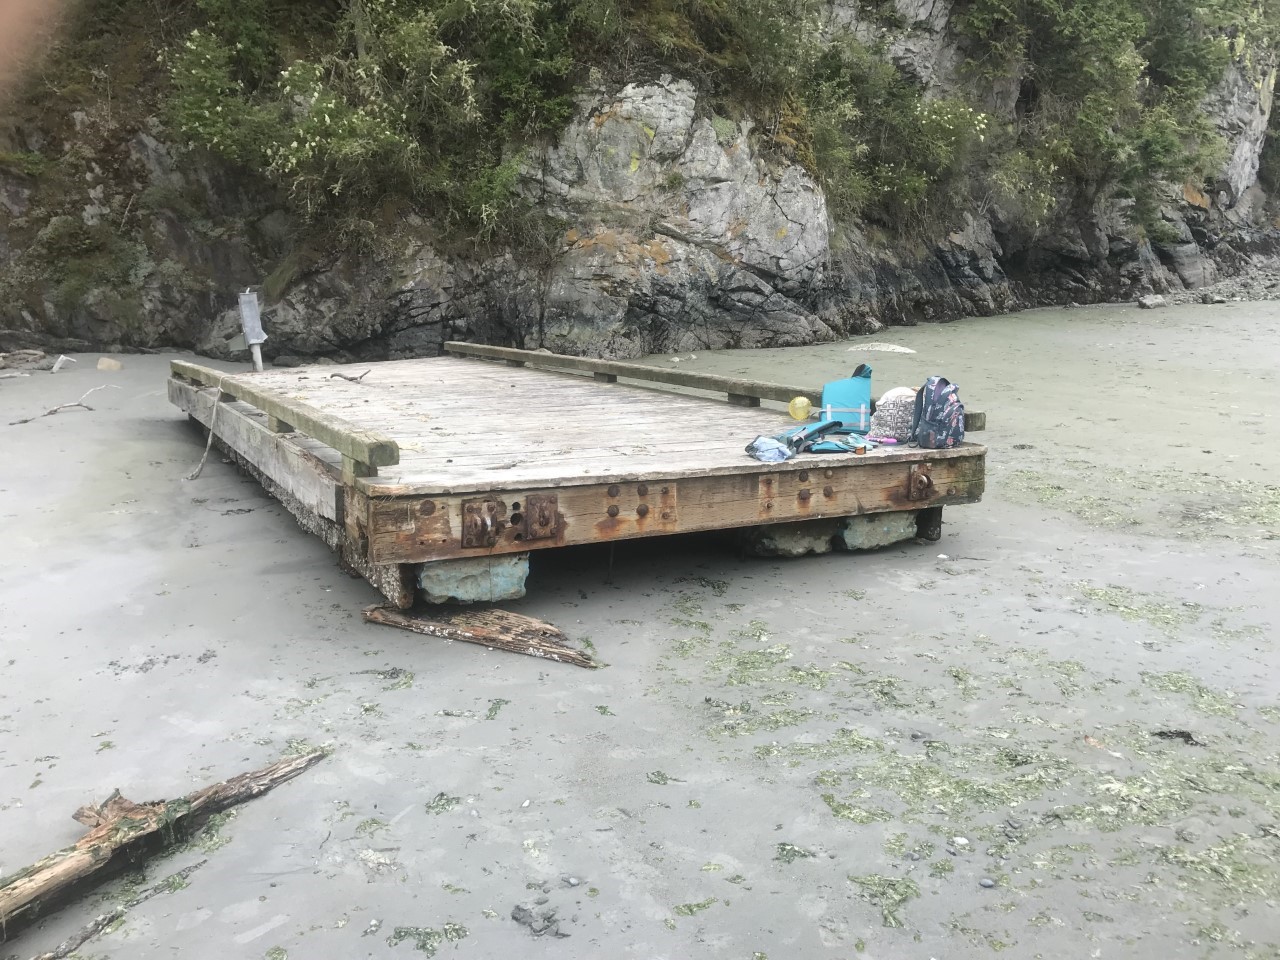 A small wooden dock on a beach with block floats made of expanded polystyrene, a material now banned in Washington for dock construction.